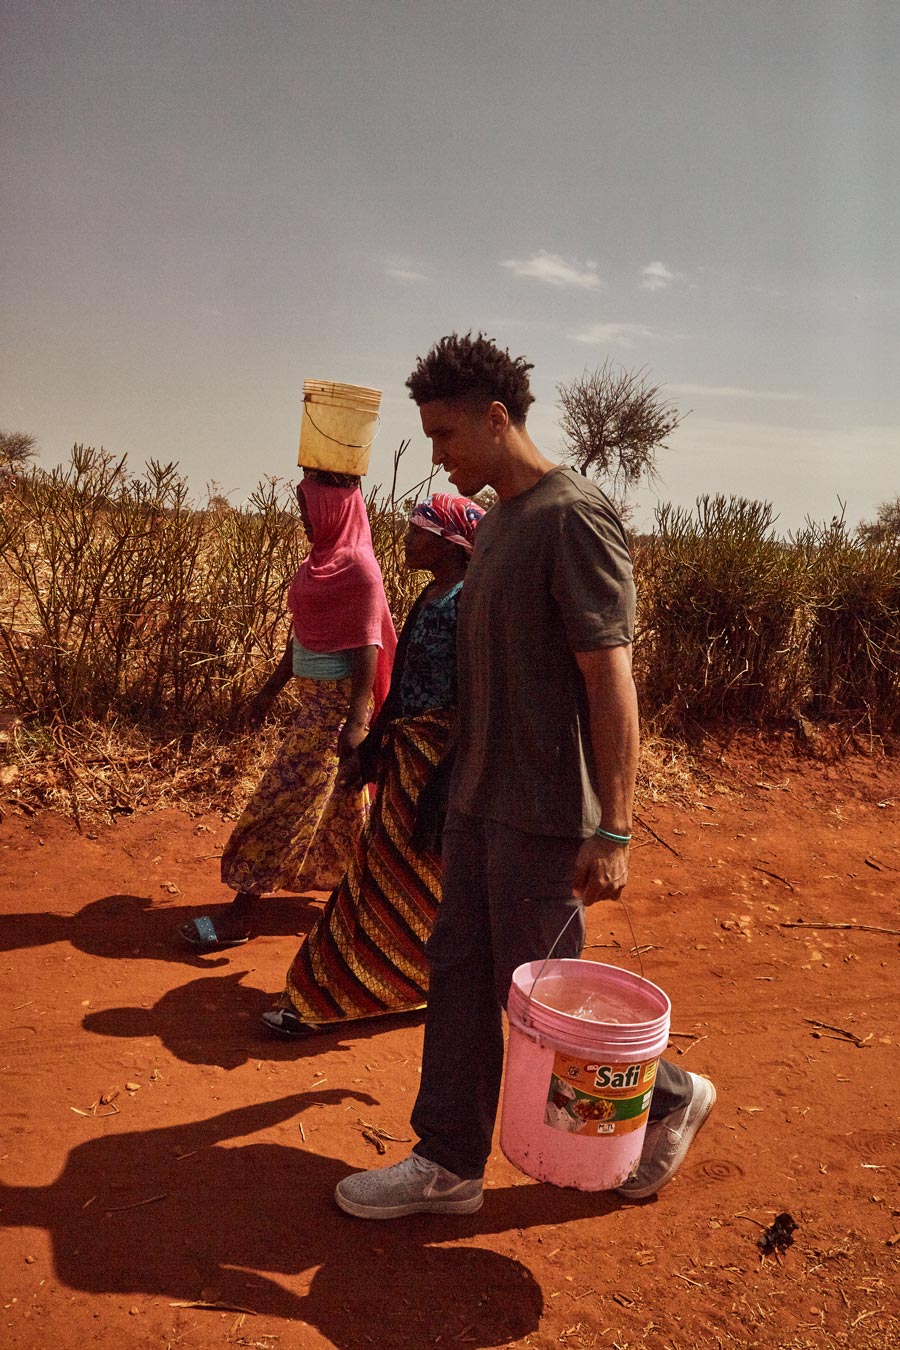 Brogdon carries buckets of water with two other people in the desert